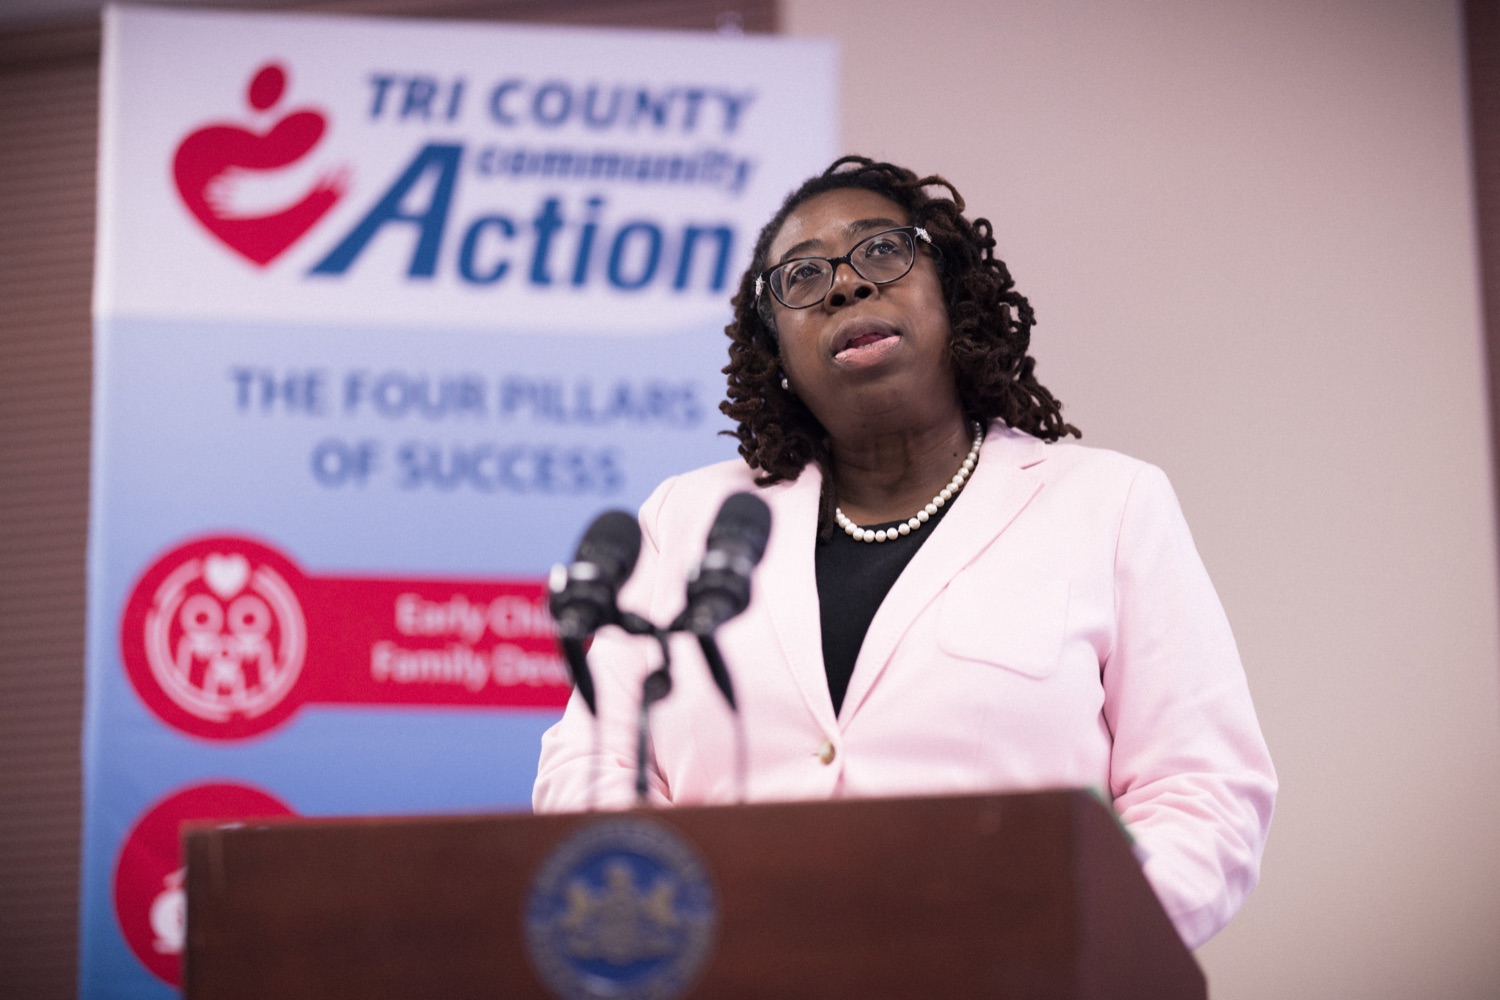 Department of Human Services (DHS) Office of Income Maintenance Deputy Secretary Inez Titus and Public Utility Commission (PUC) Chair Gladys Brown Dutrieuille visited Tri County Community Action in Enola today to announce the start of the annual Low-Income Home Energy Assistance Program (LIHEAP) application process for the 2022-23 season. OCTOBER 31, 2022 - ENOLA, PA<br><a href="https://filesource.amperwave.net/commonwealthofpa/photo/22322_dhs_liheap_dz_002.JPG" target="_blank">⇣ Download Photo</a>